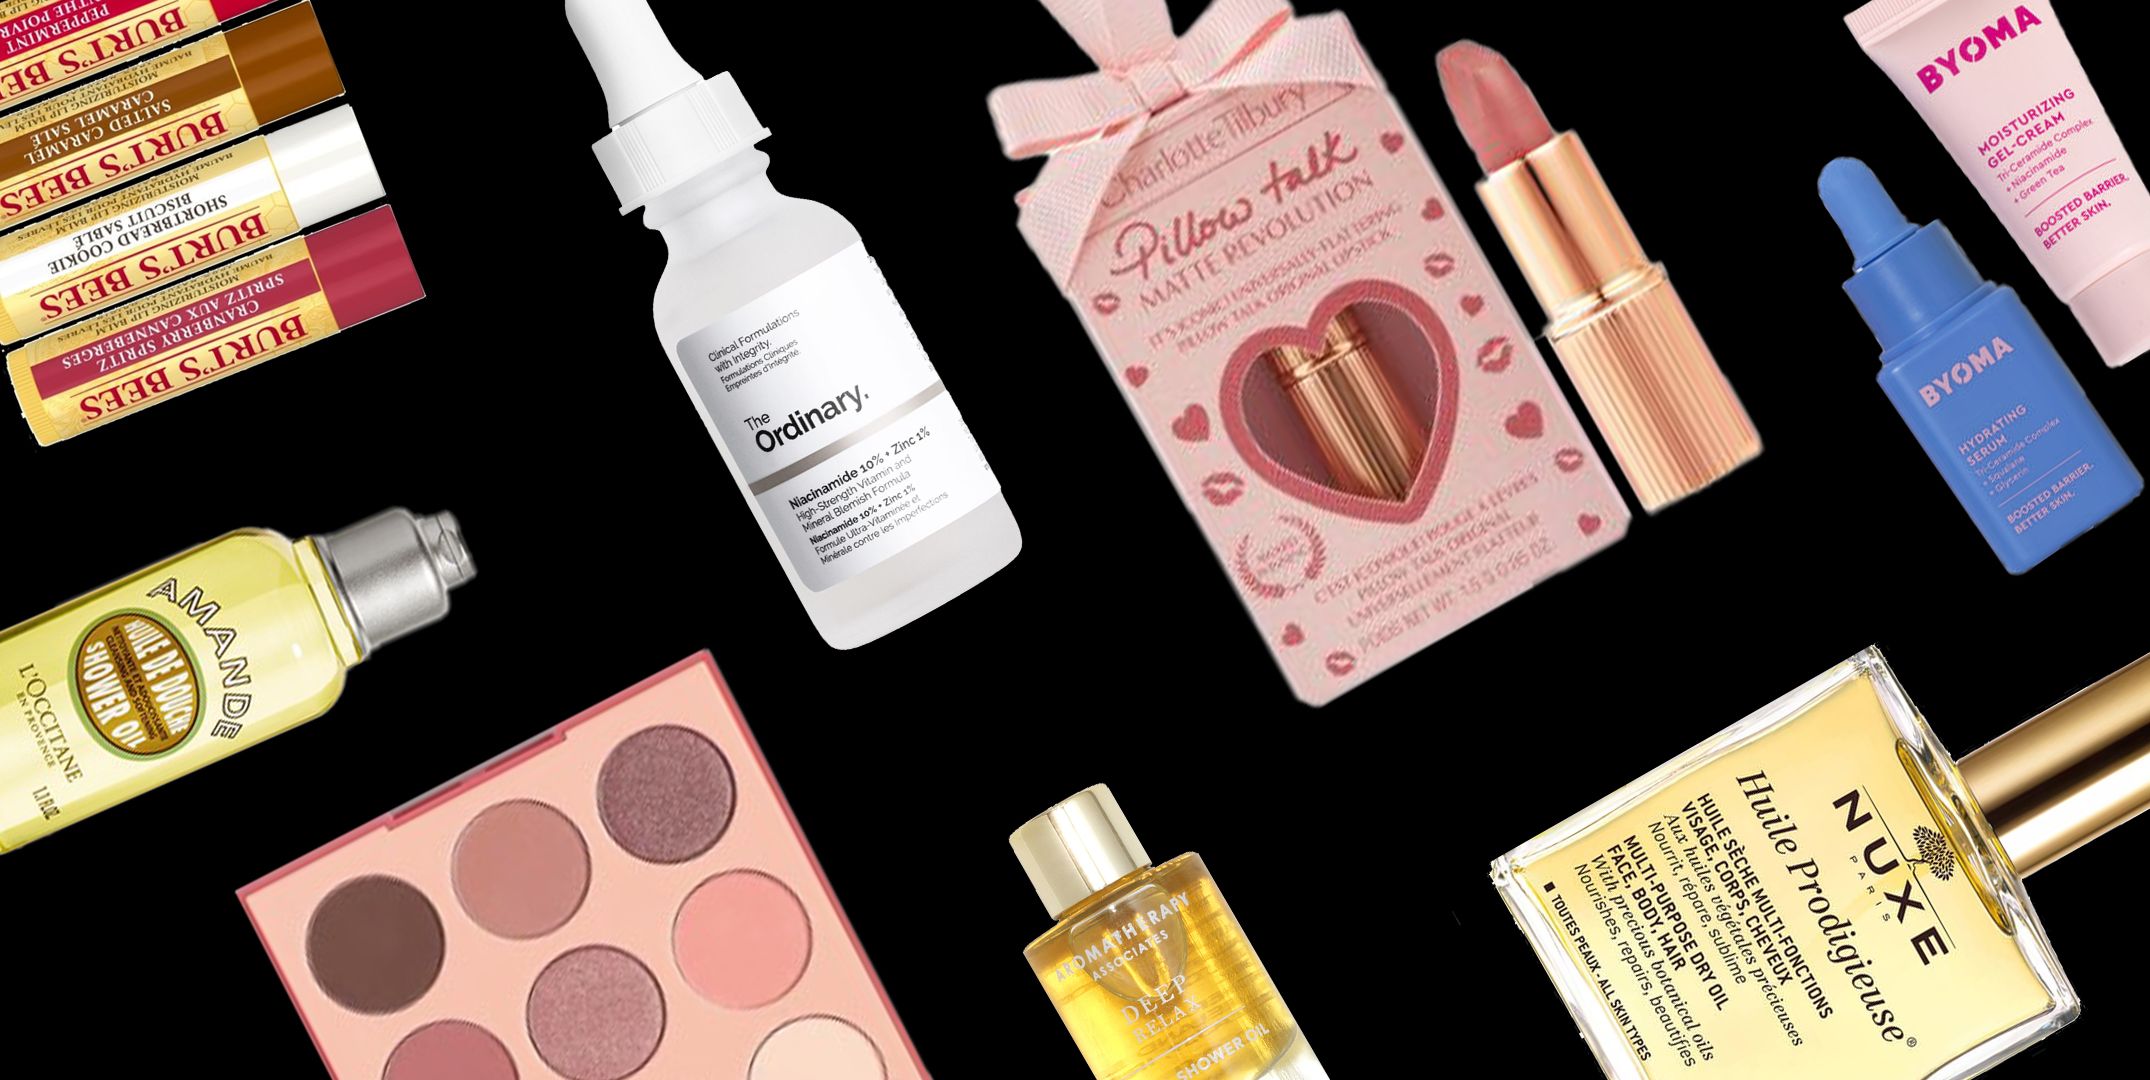 Burt's Bees - WIN!! The perfect pink is out there, and we'll help